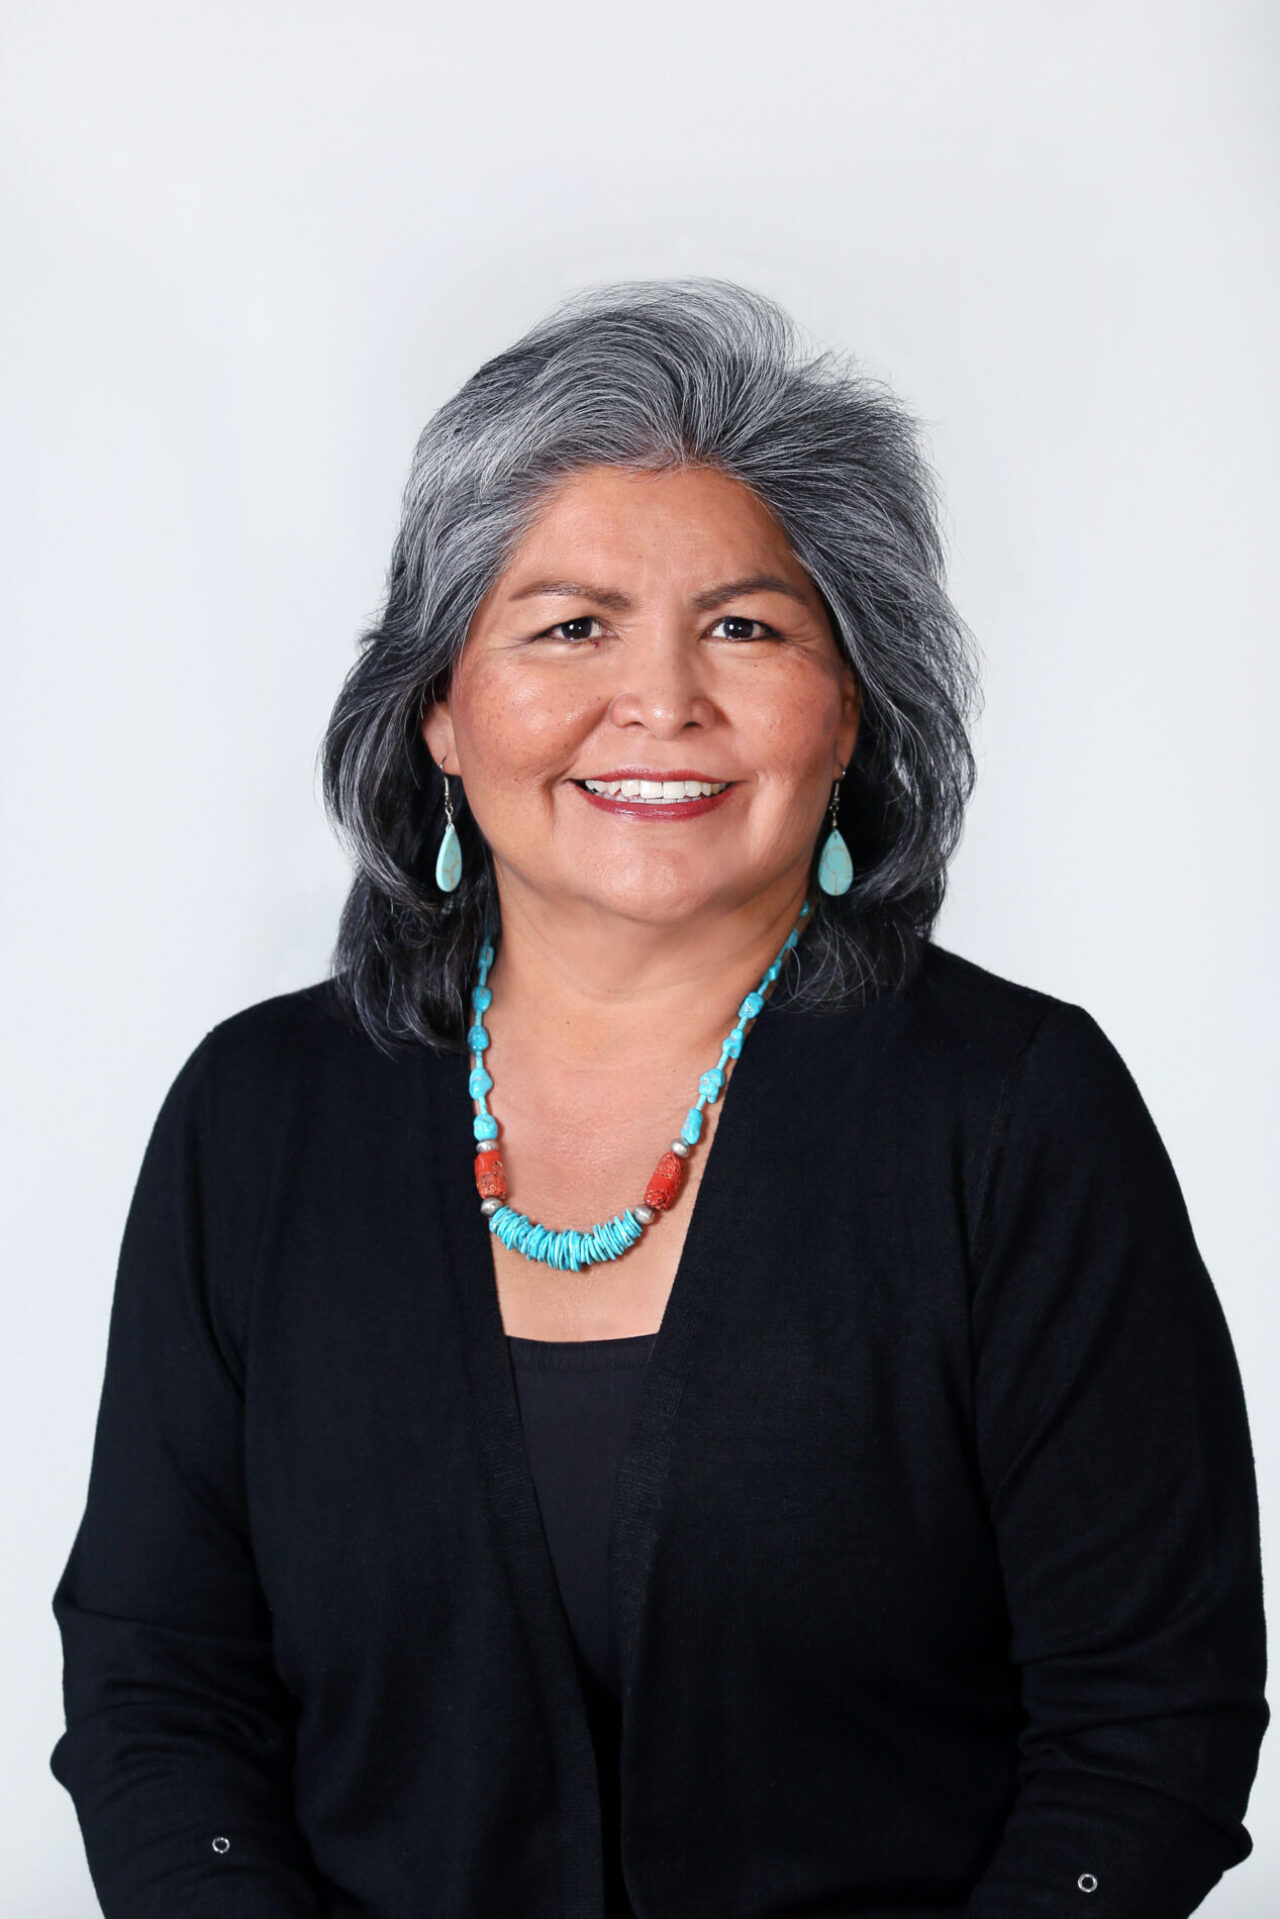 Portrait of a woman with gray hair and turquoise jewelry